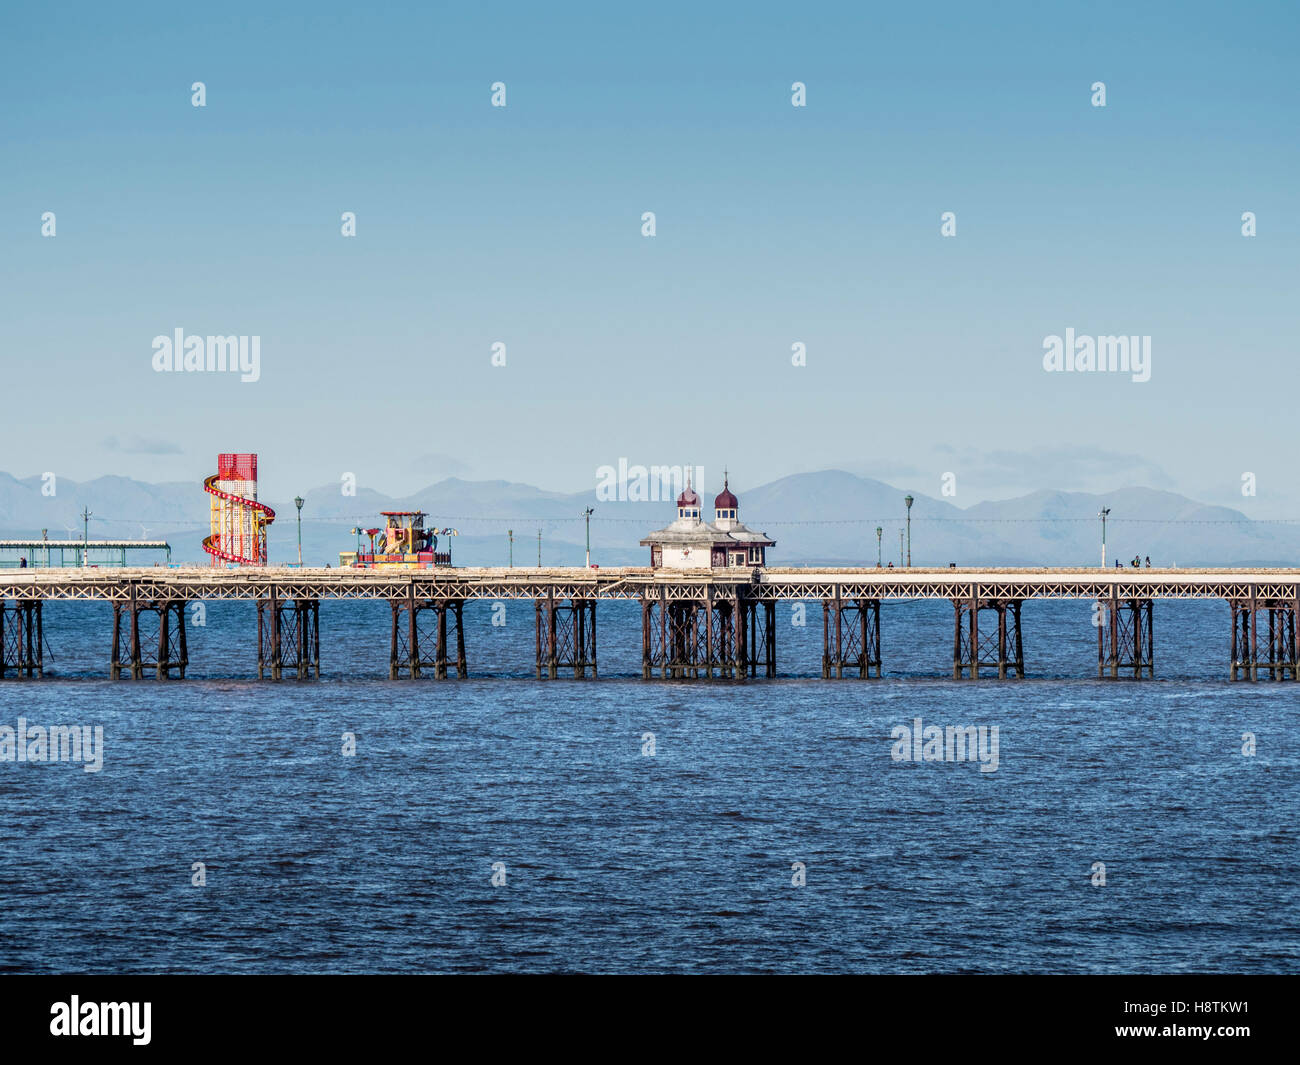 North Pier with Cumbrian hills in distance, Blackpool, Lancashire, UK. Stock Photo